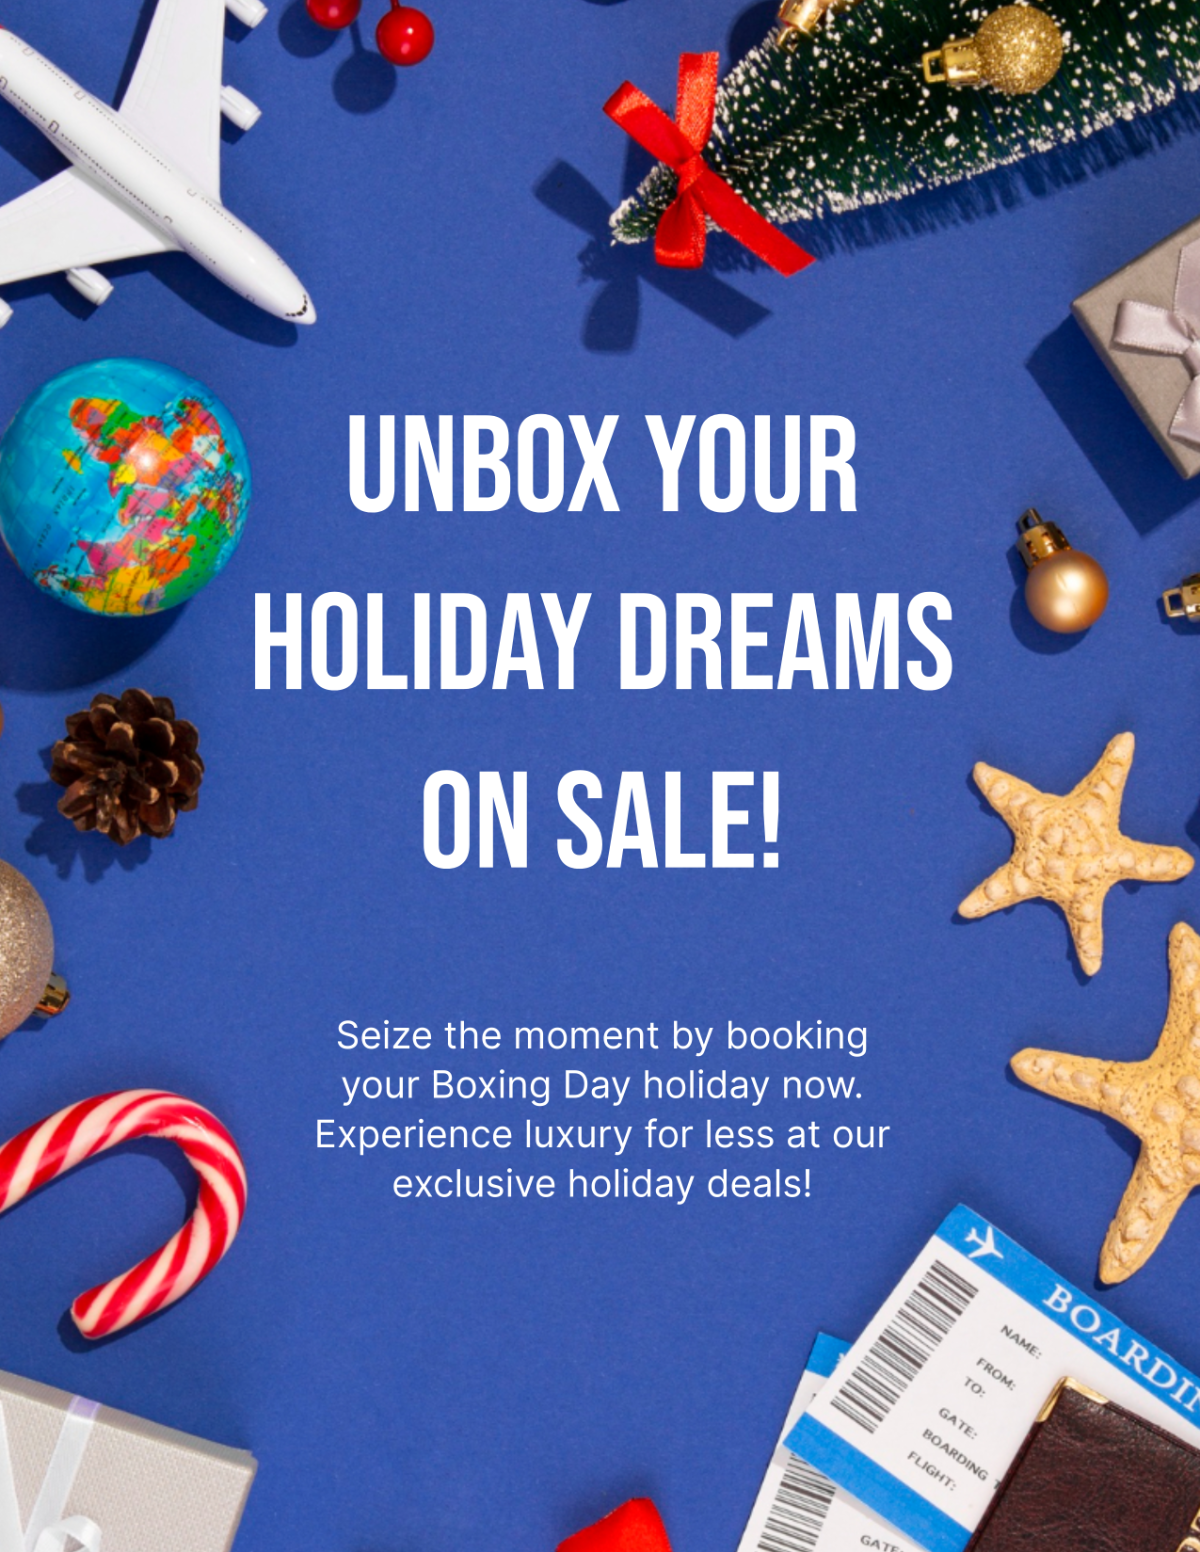 Free Simple Boxing Day Holiday Deals Template